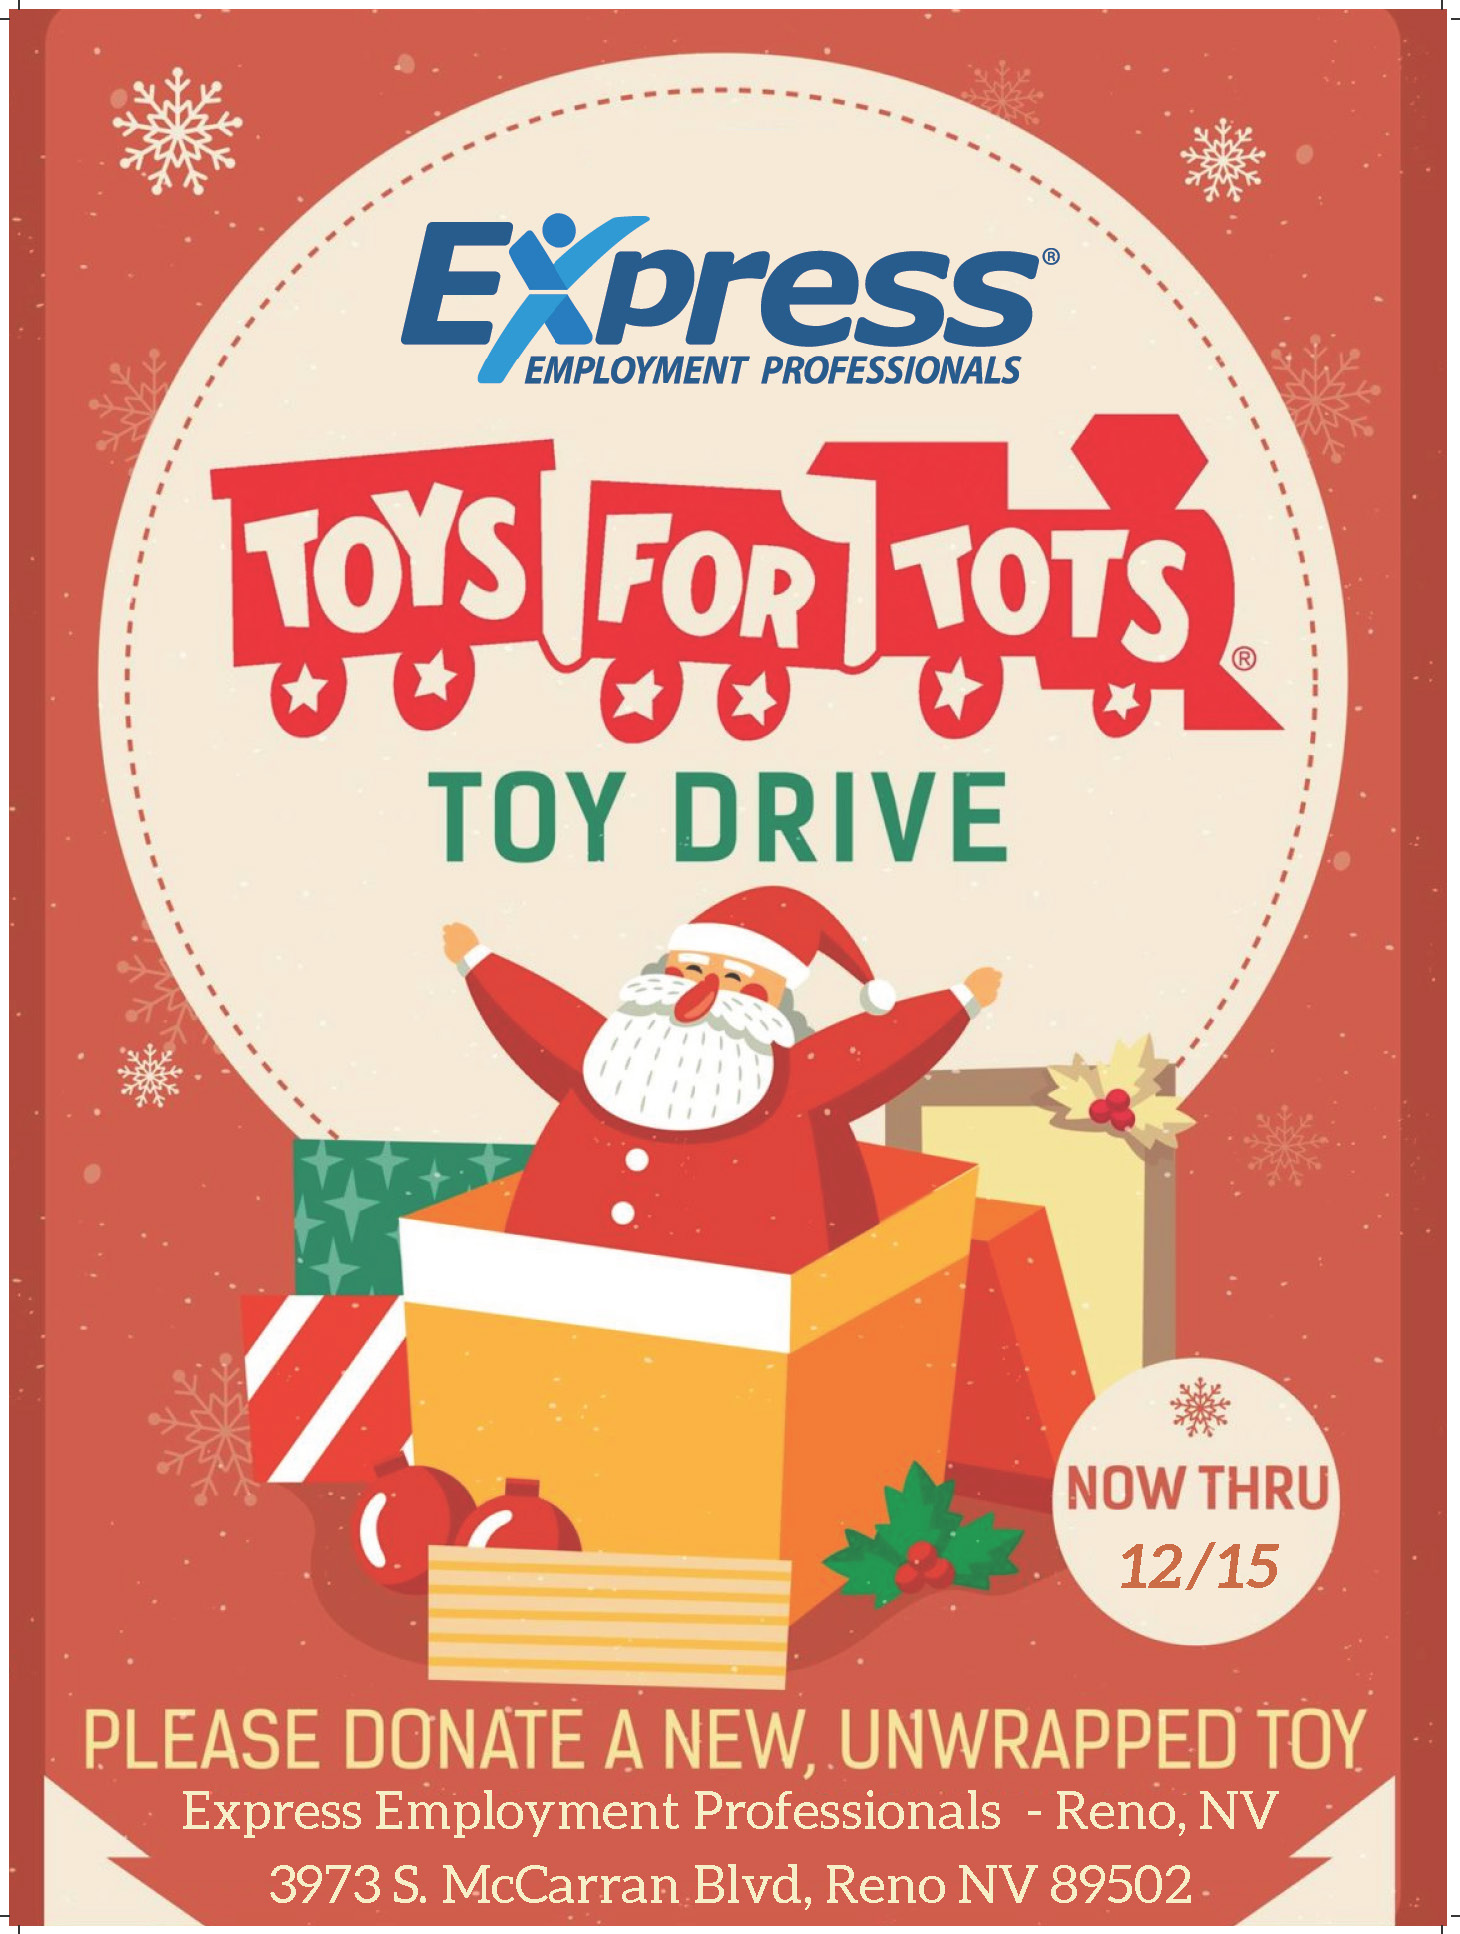 Toys for Tots - Reno Staffing Companies Near Me